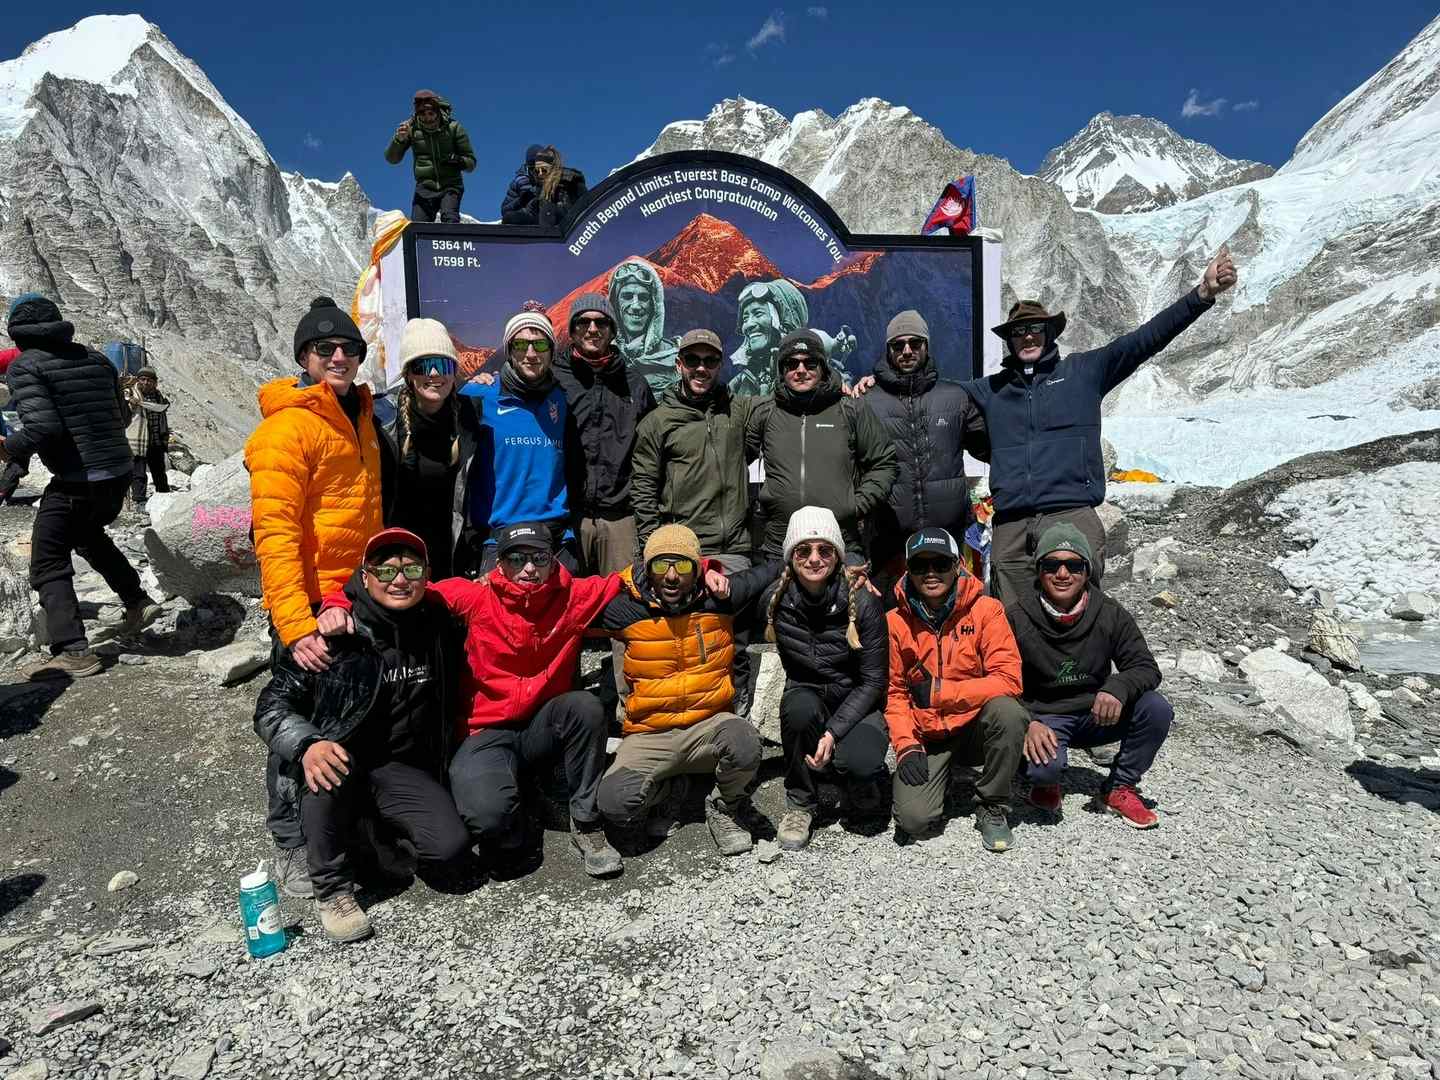 An Amazing Trip to Everest Base Camp